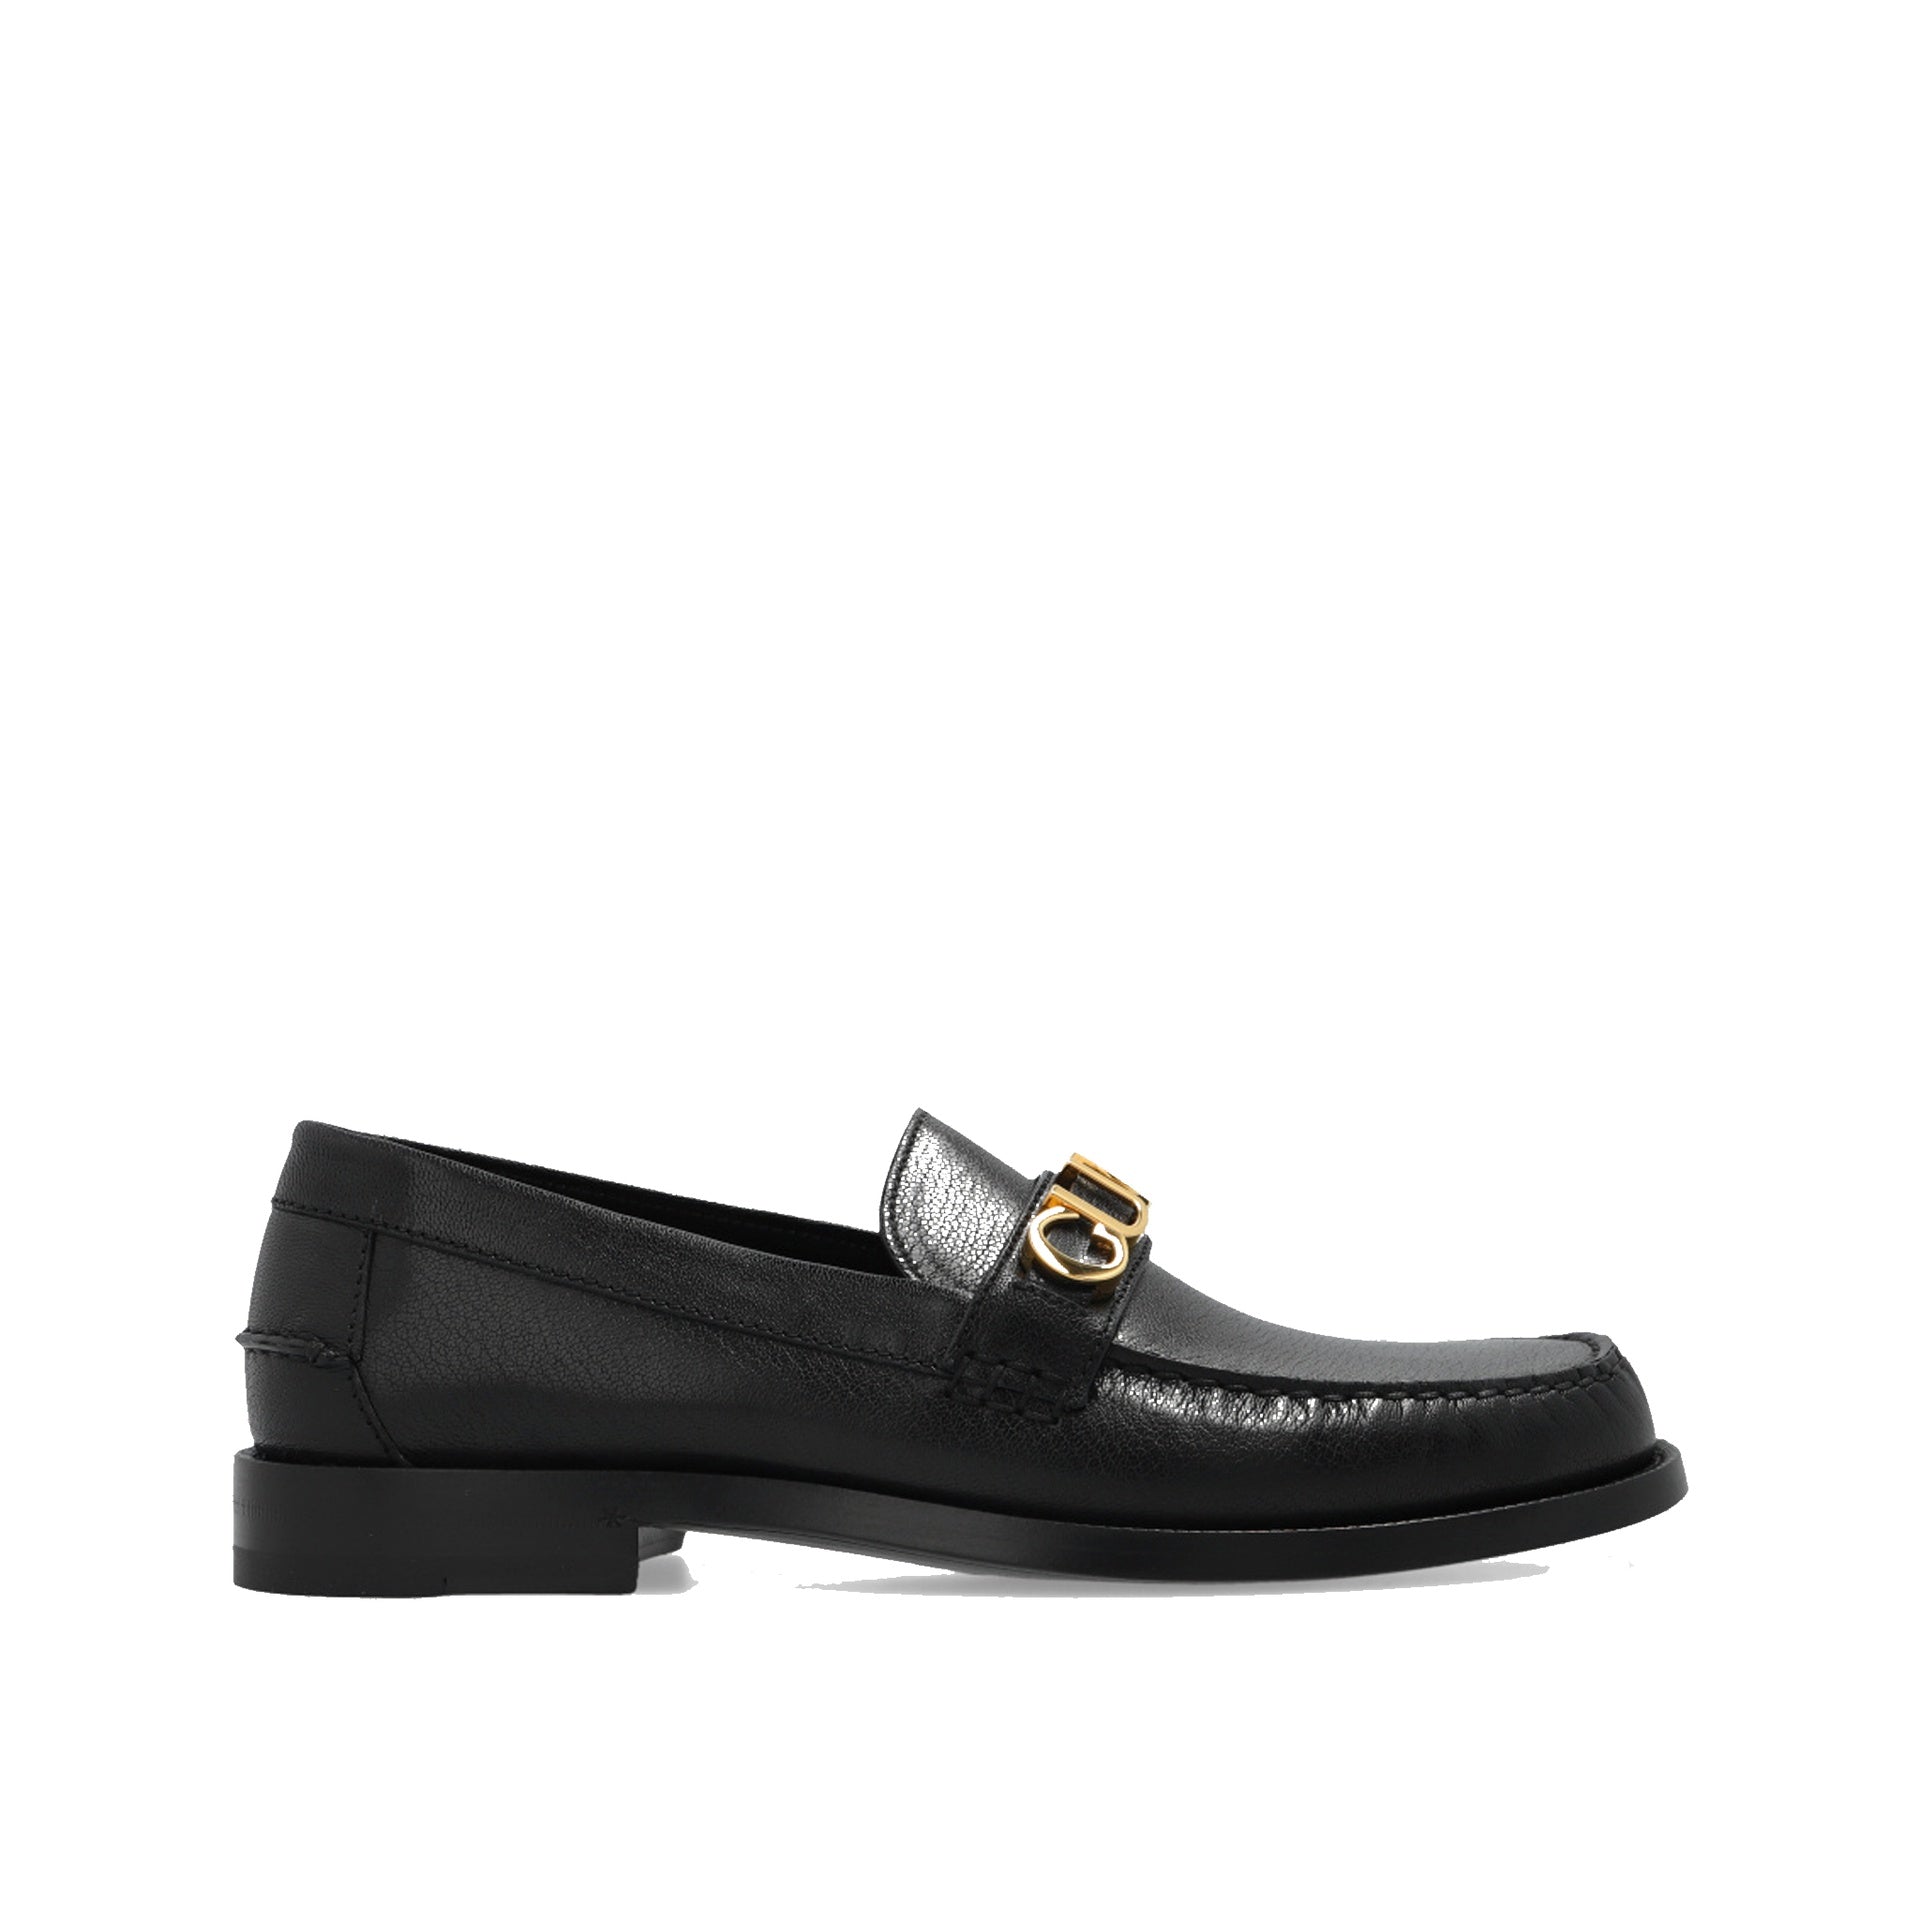 GUCCI GUCCI LOGO PLAQUE LEATHER LOAFERS